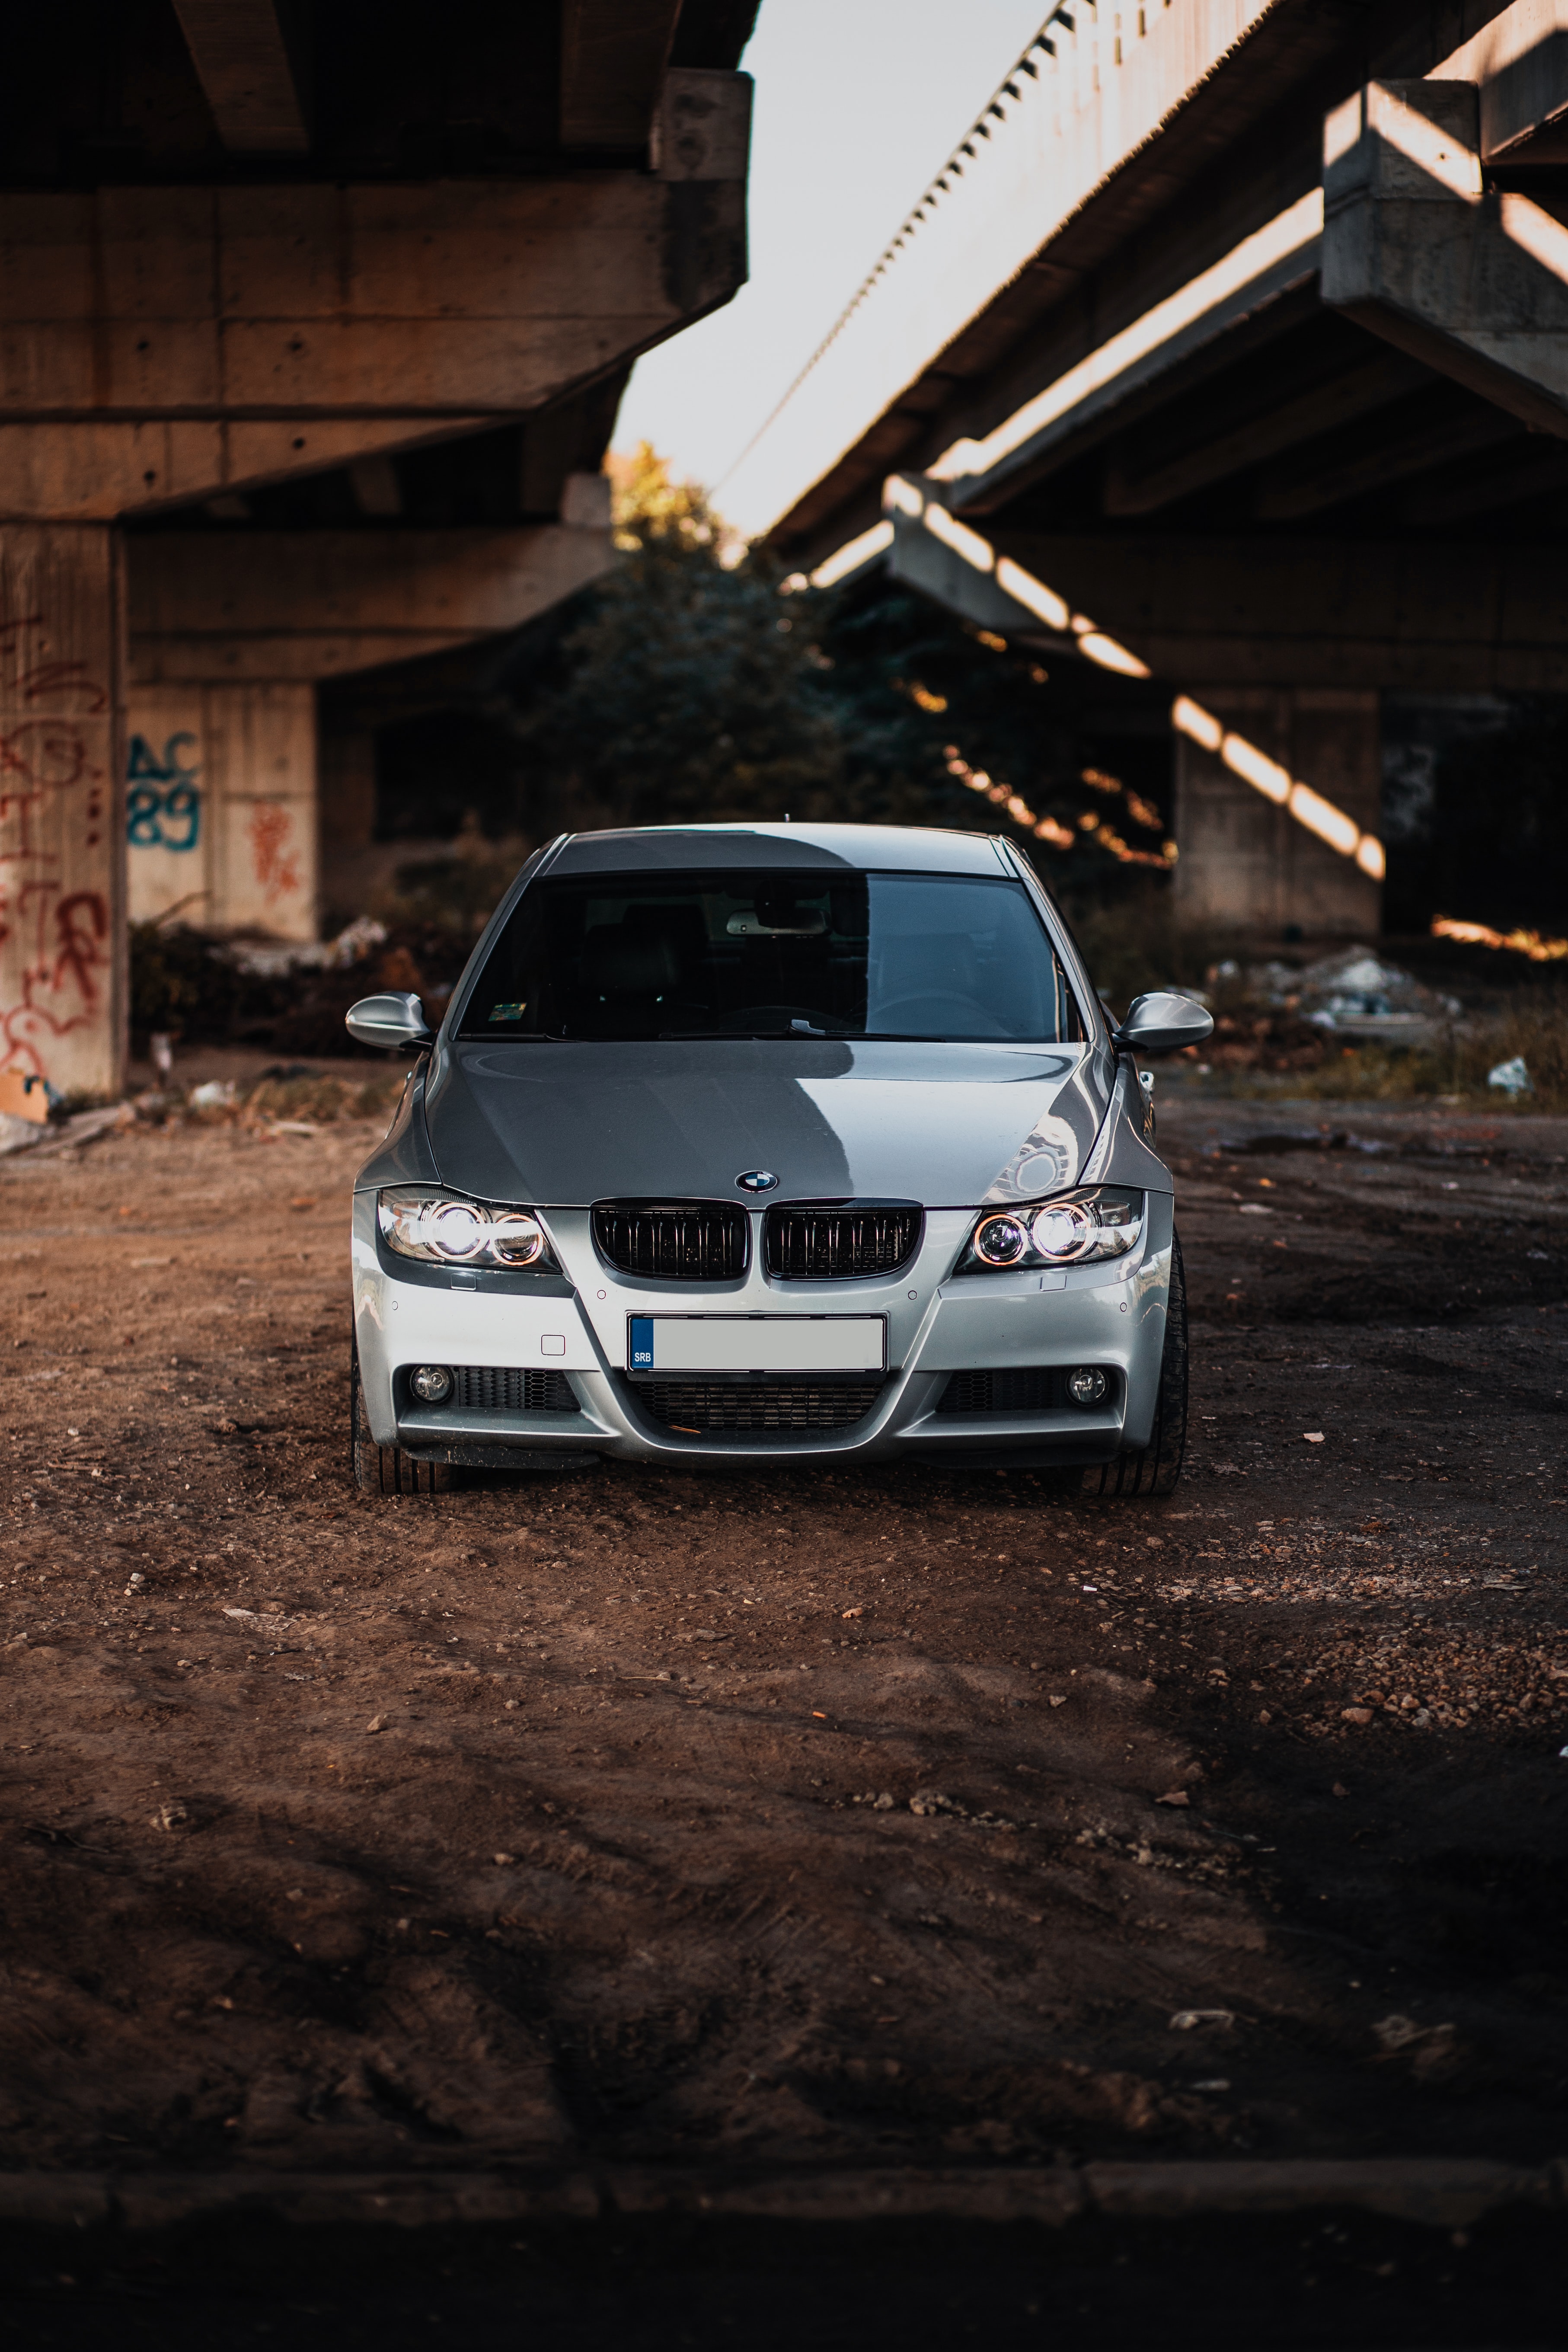 Cool Backgrounds front view, silver, grey, car Bmw M3